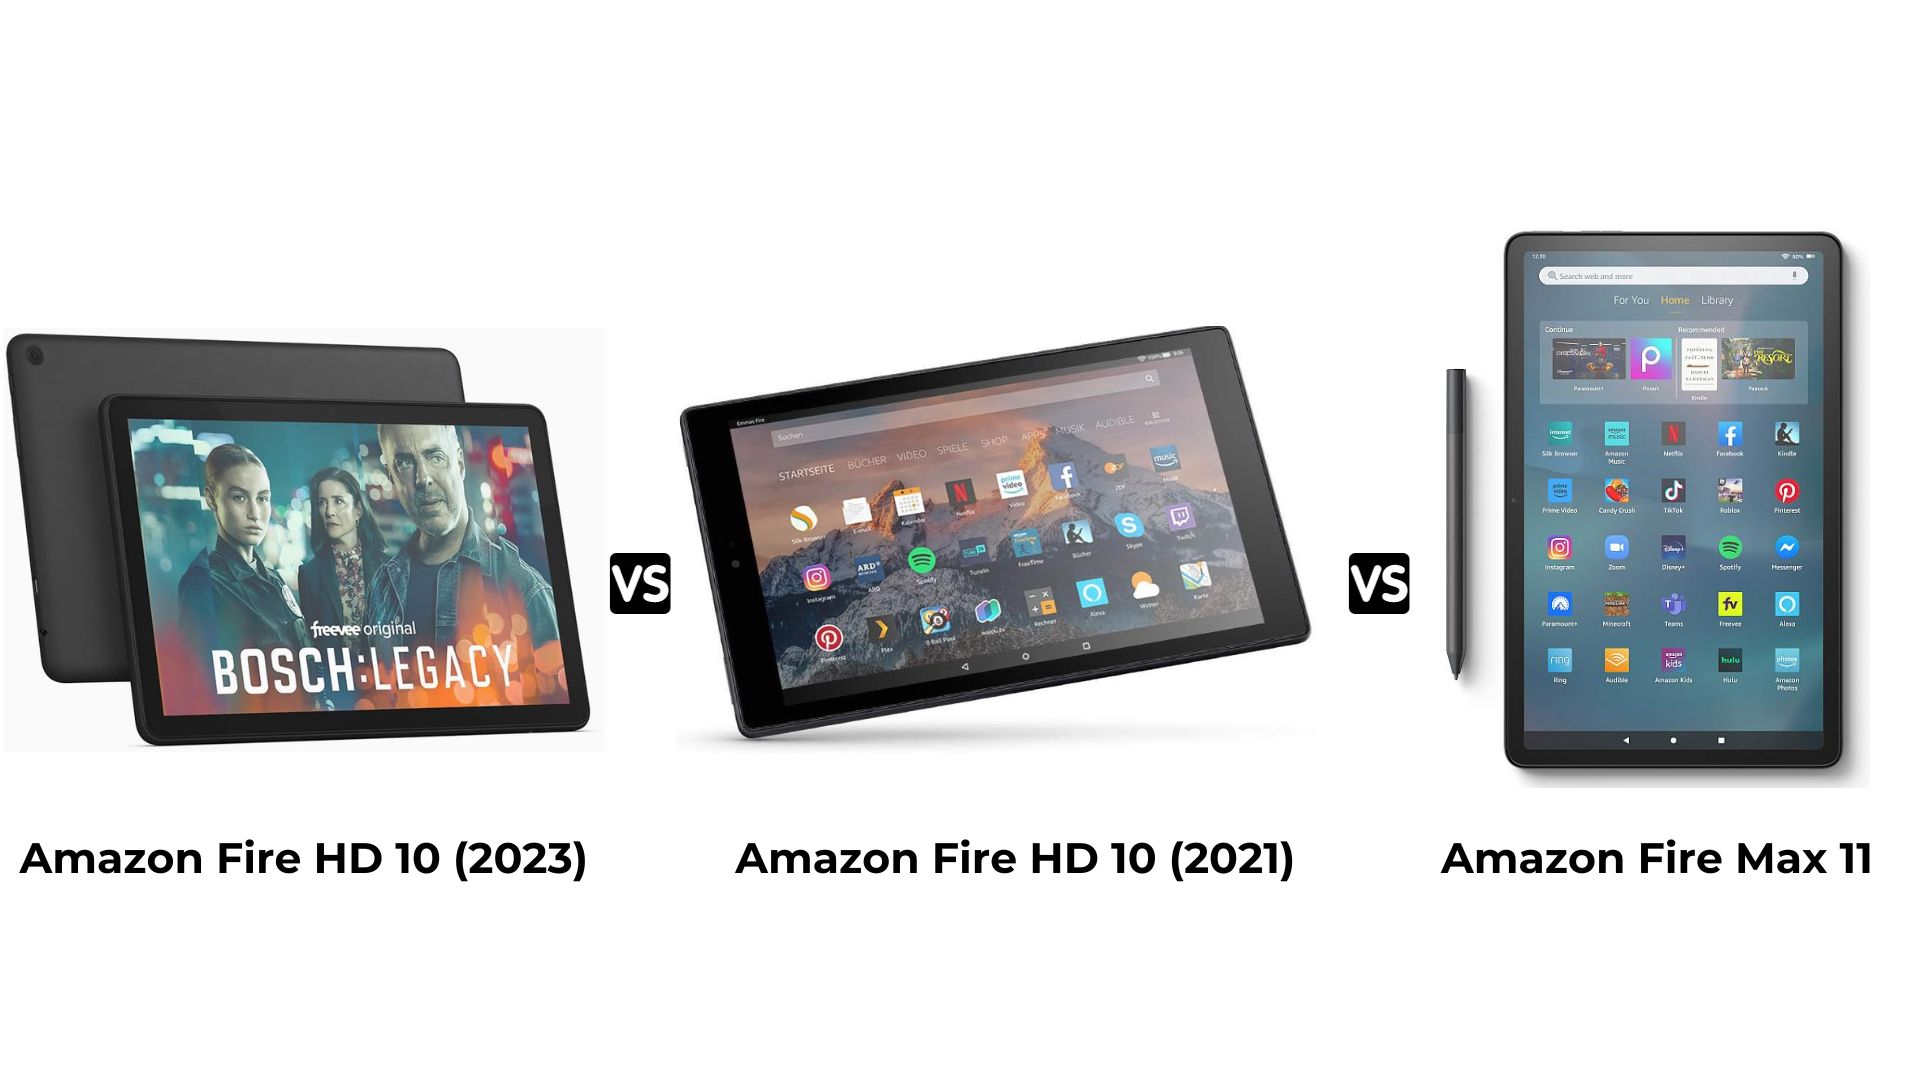 Fire Max 11 vs  Fire HD 10: What's the difference